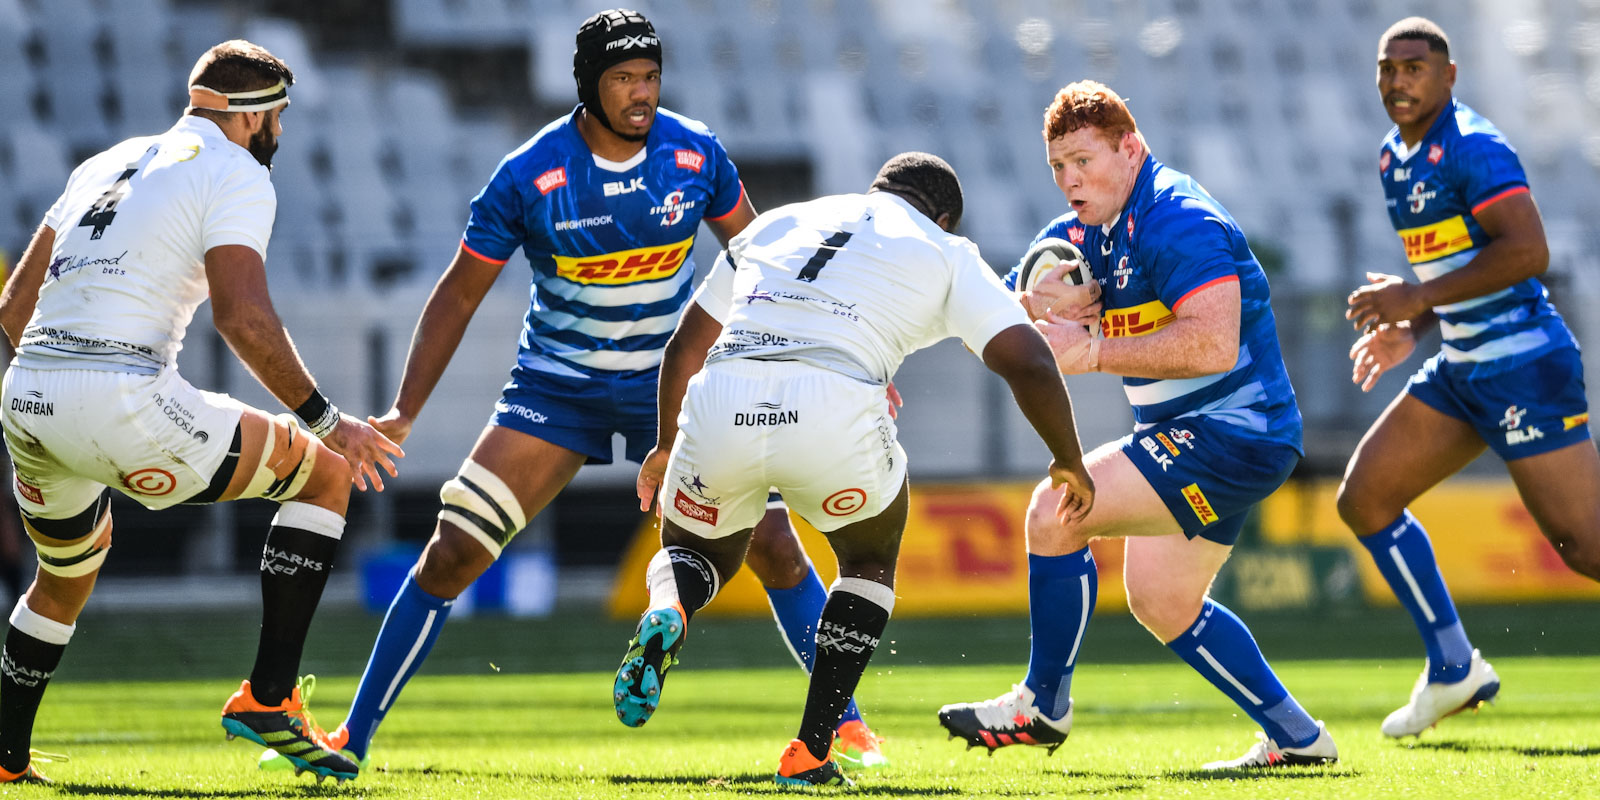 Springbok prop Steven Kitshoff on the charge for the DHL Stormers.